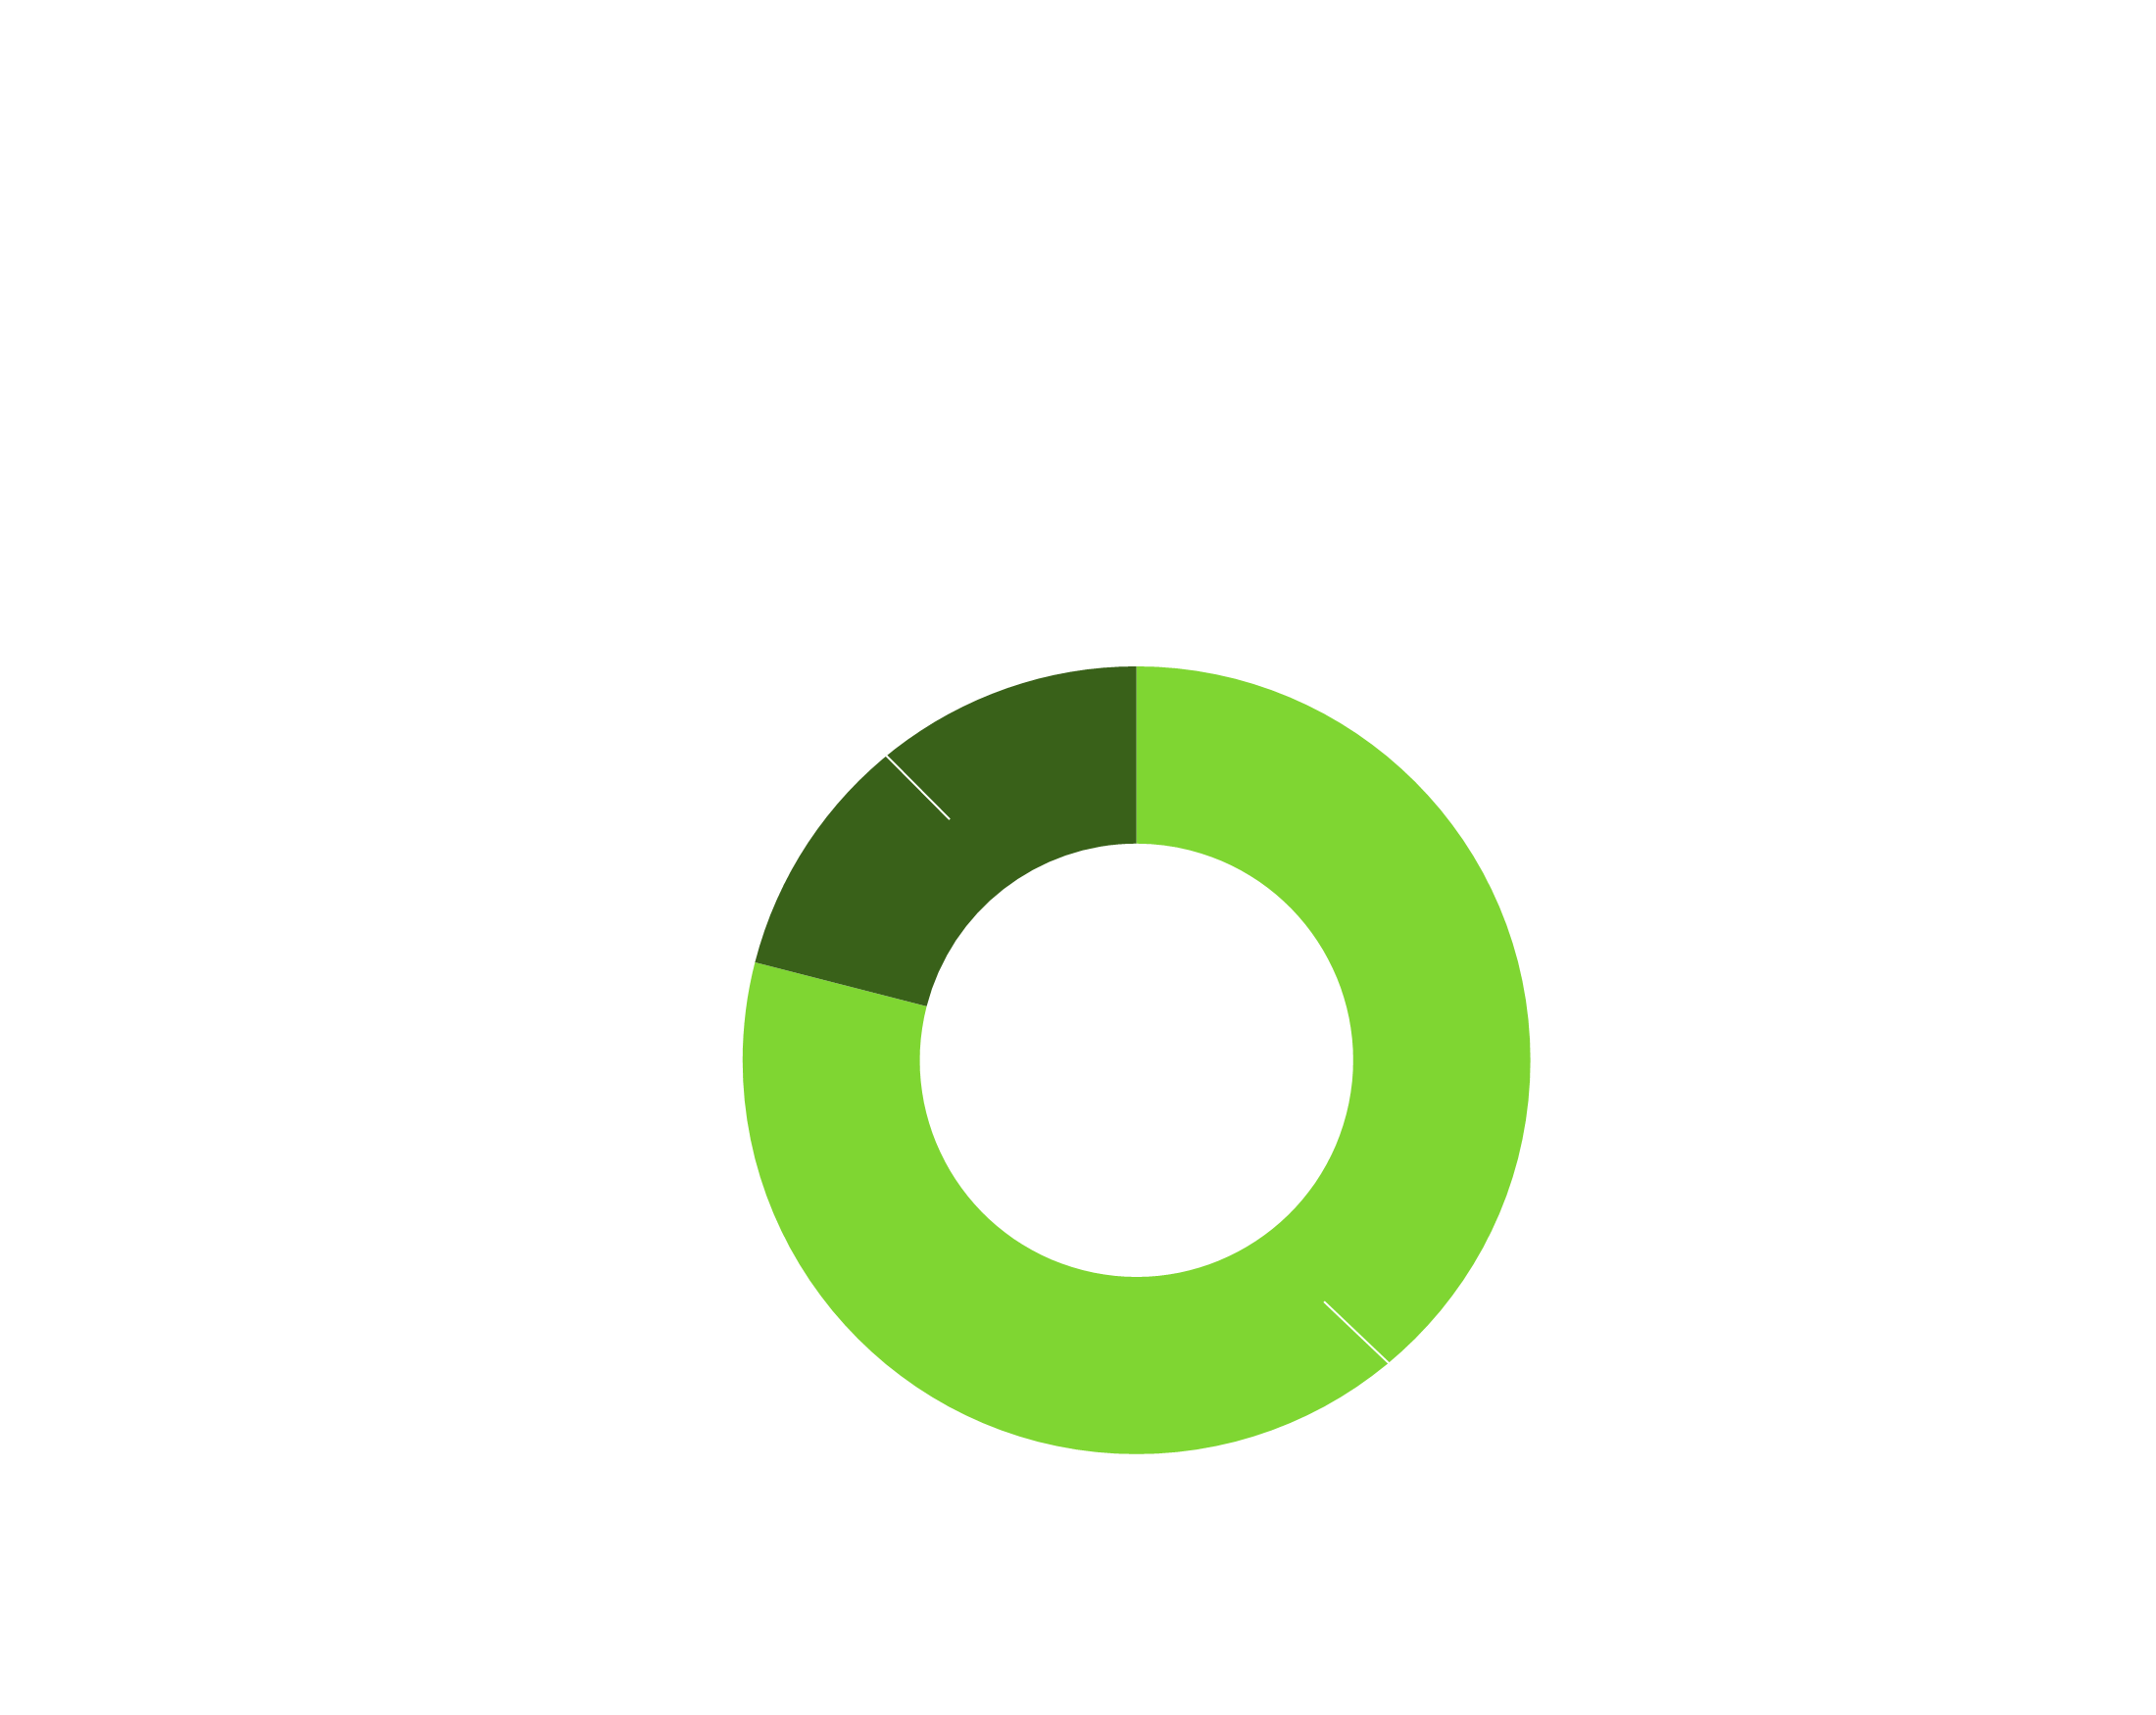 Federal Funds are 79% to UDOT and 21% to Local and Pass Through.